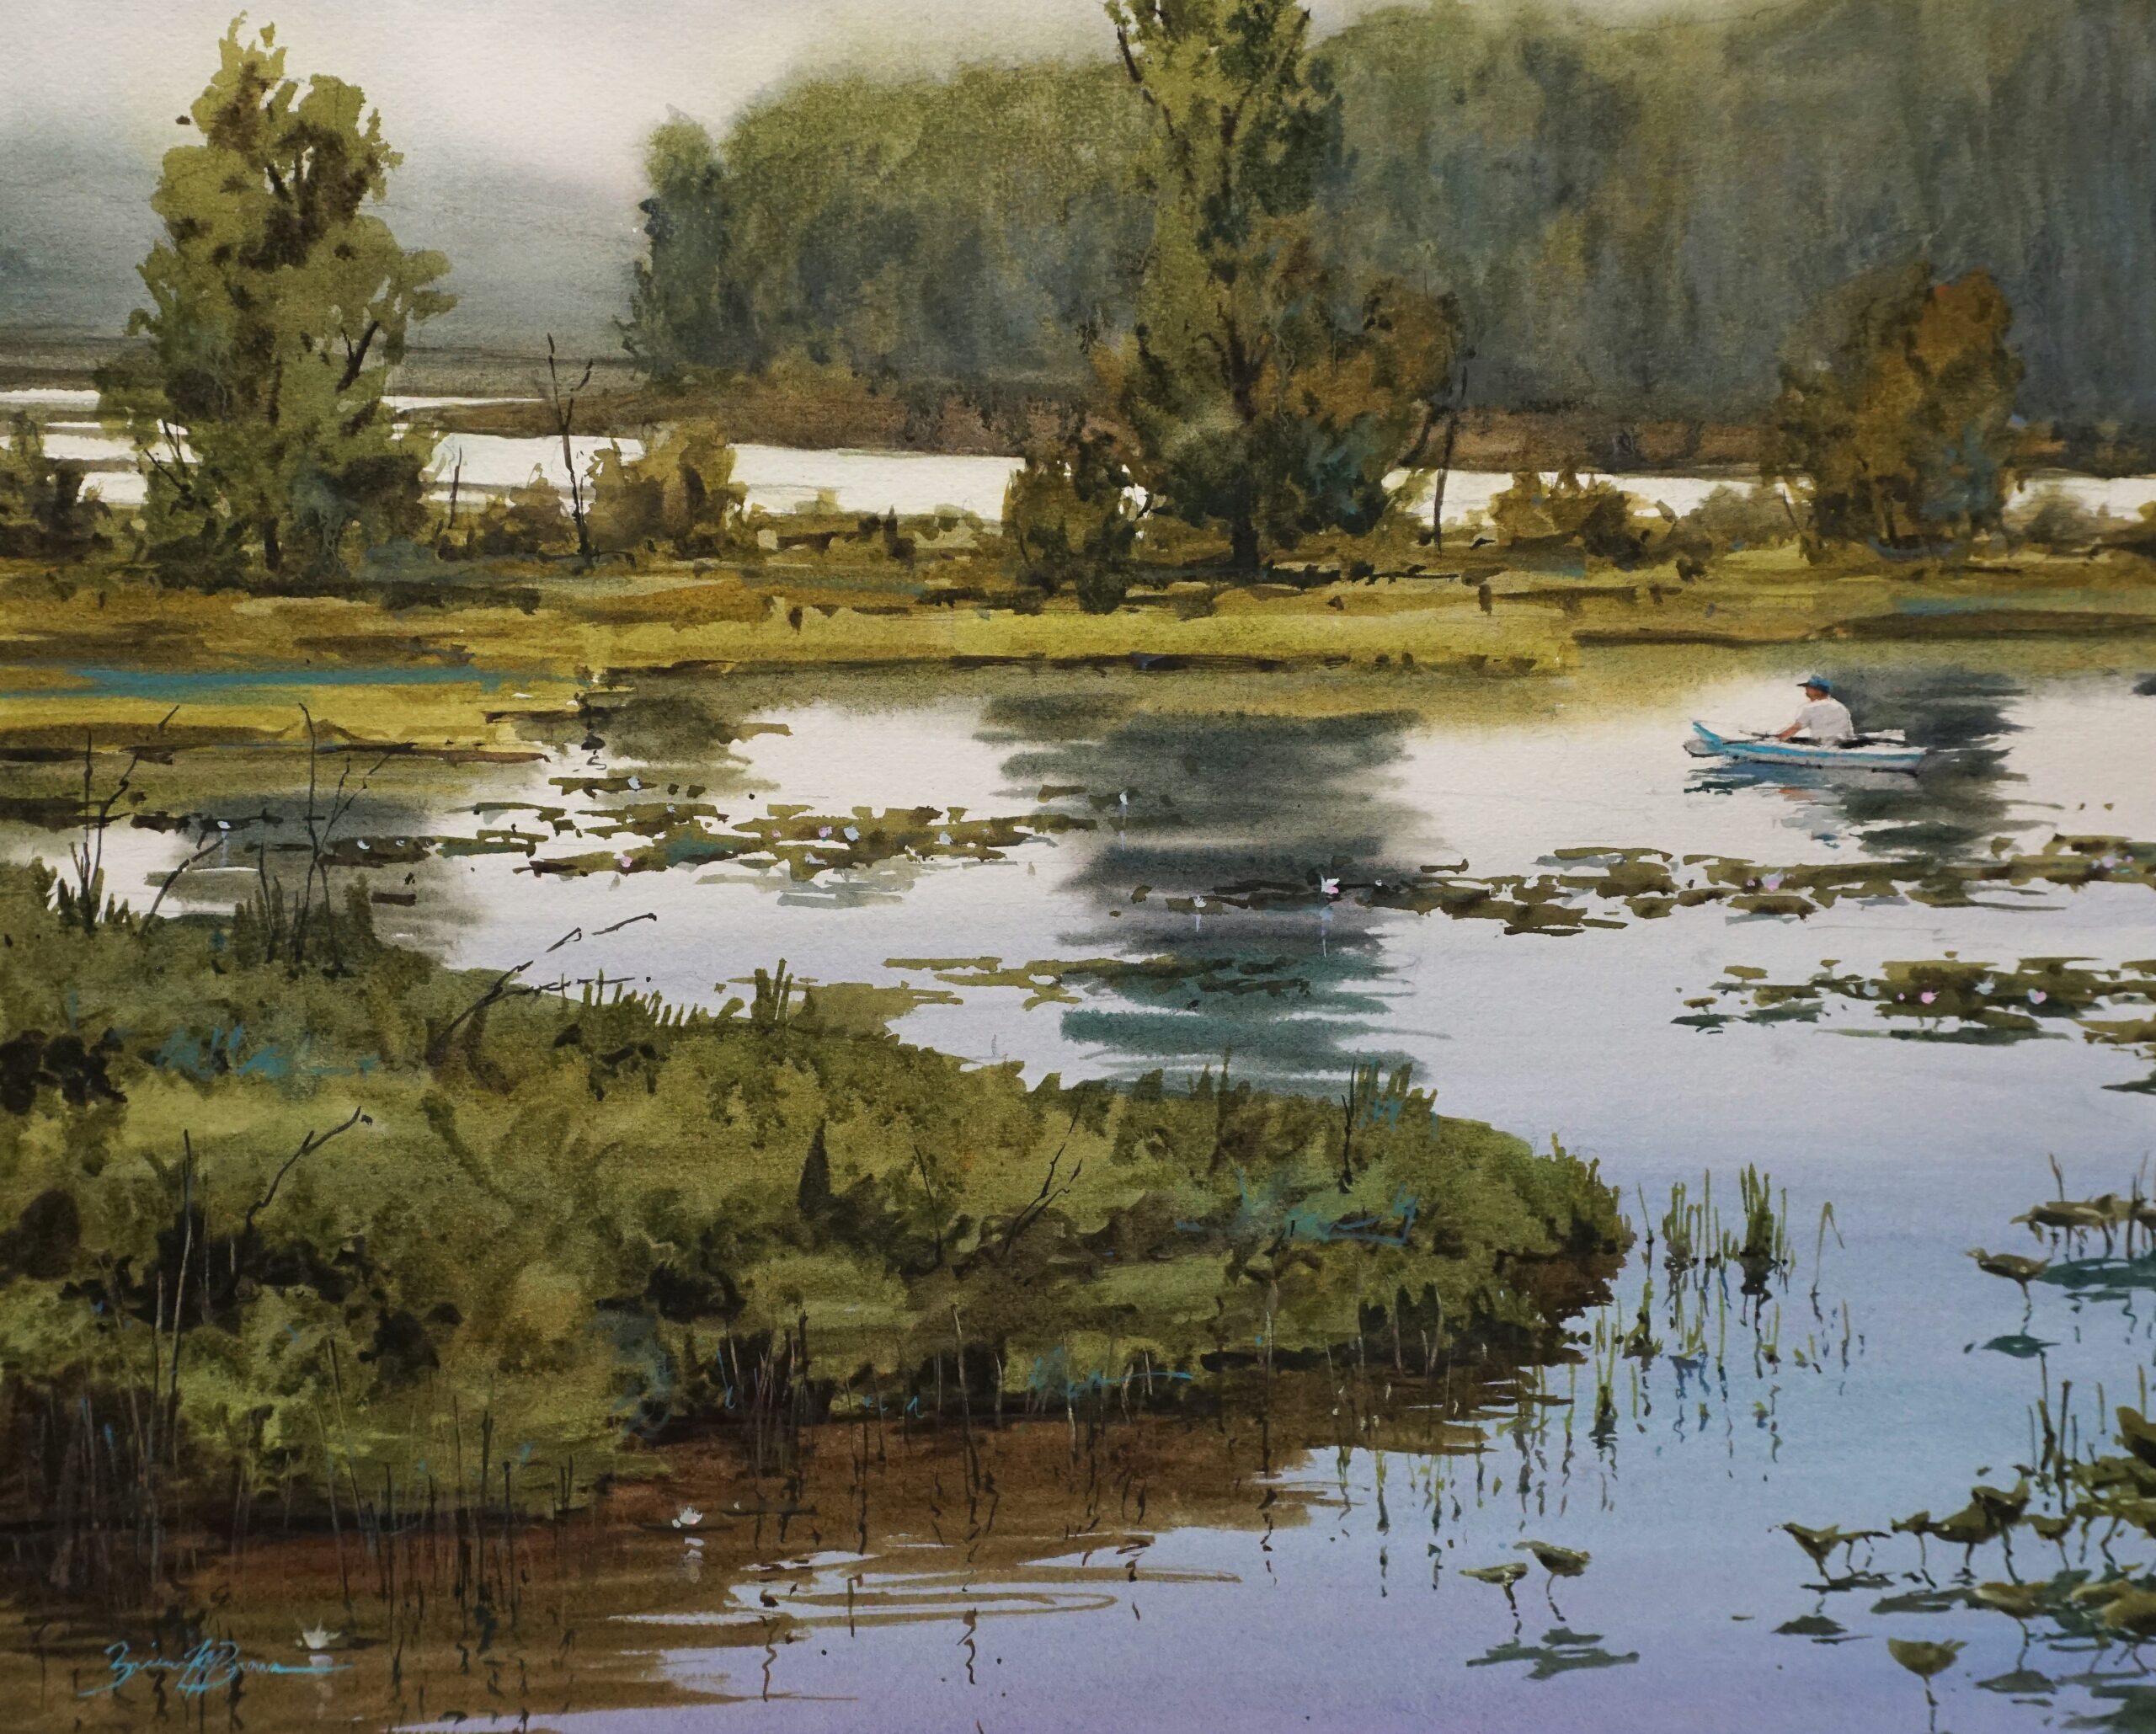 Plein air landscape painting with water